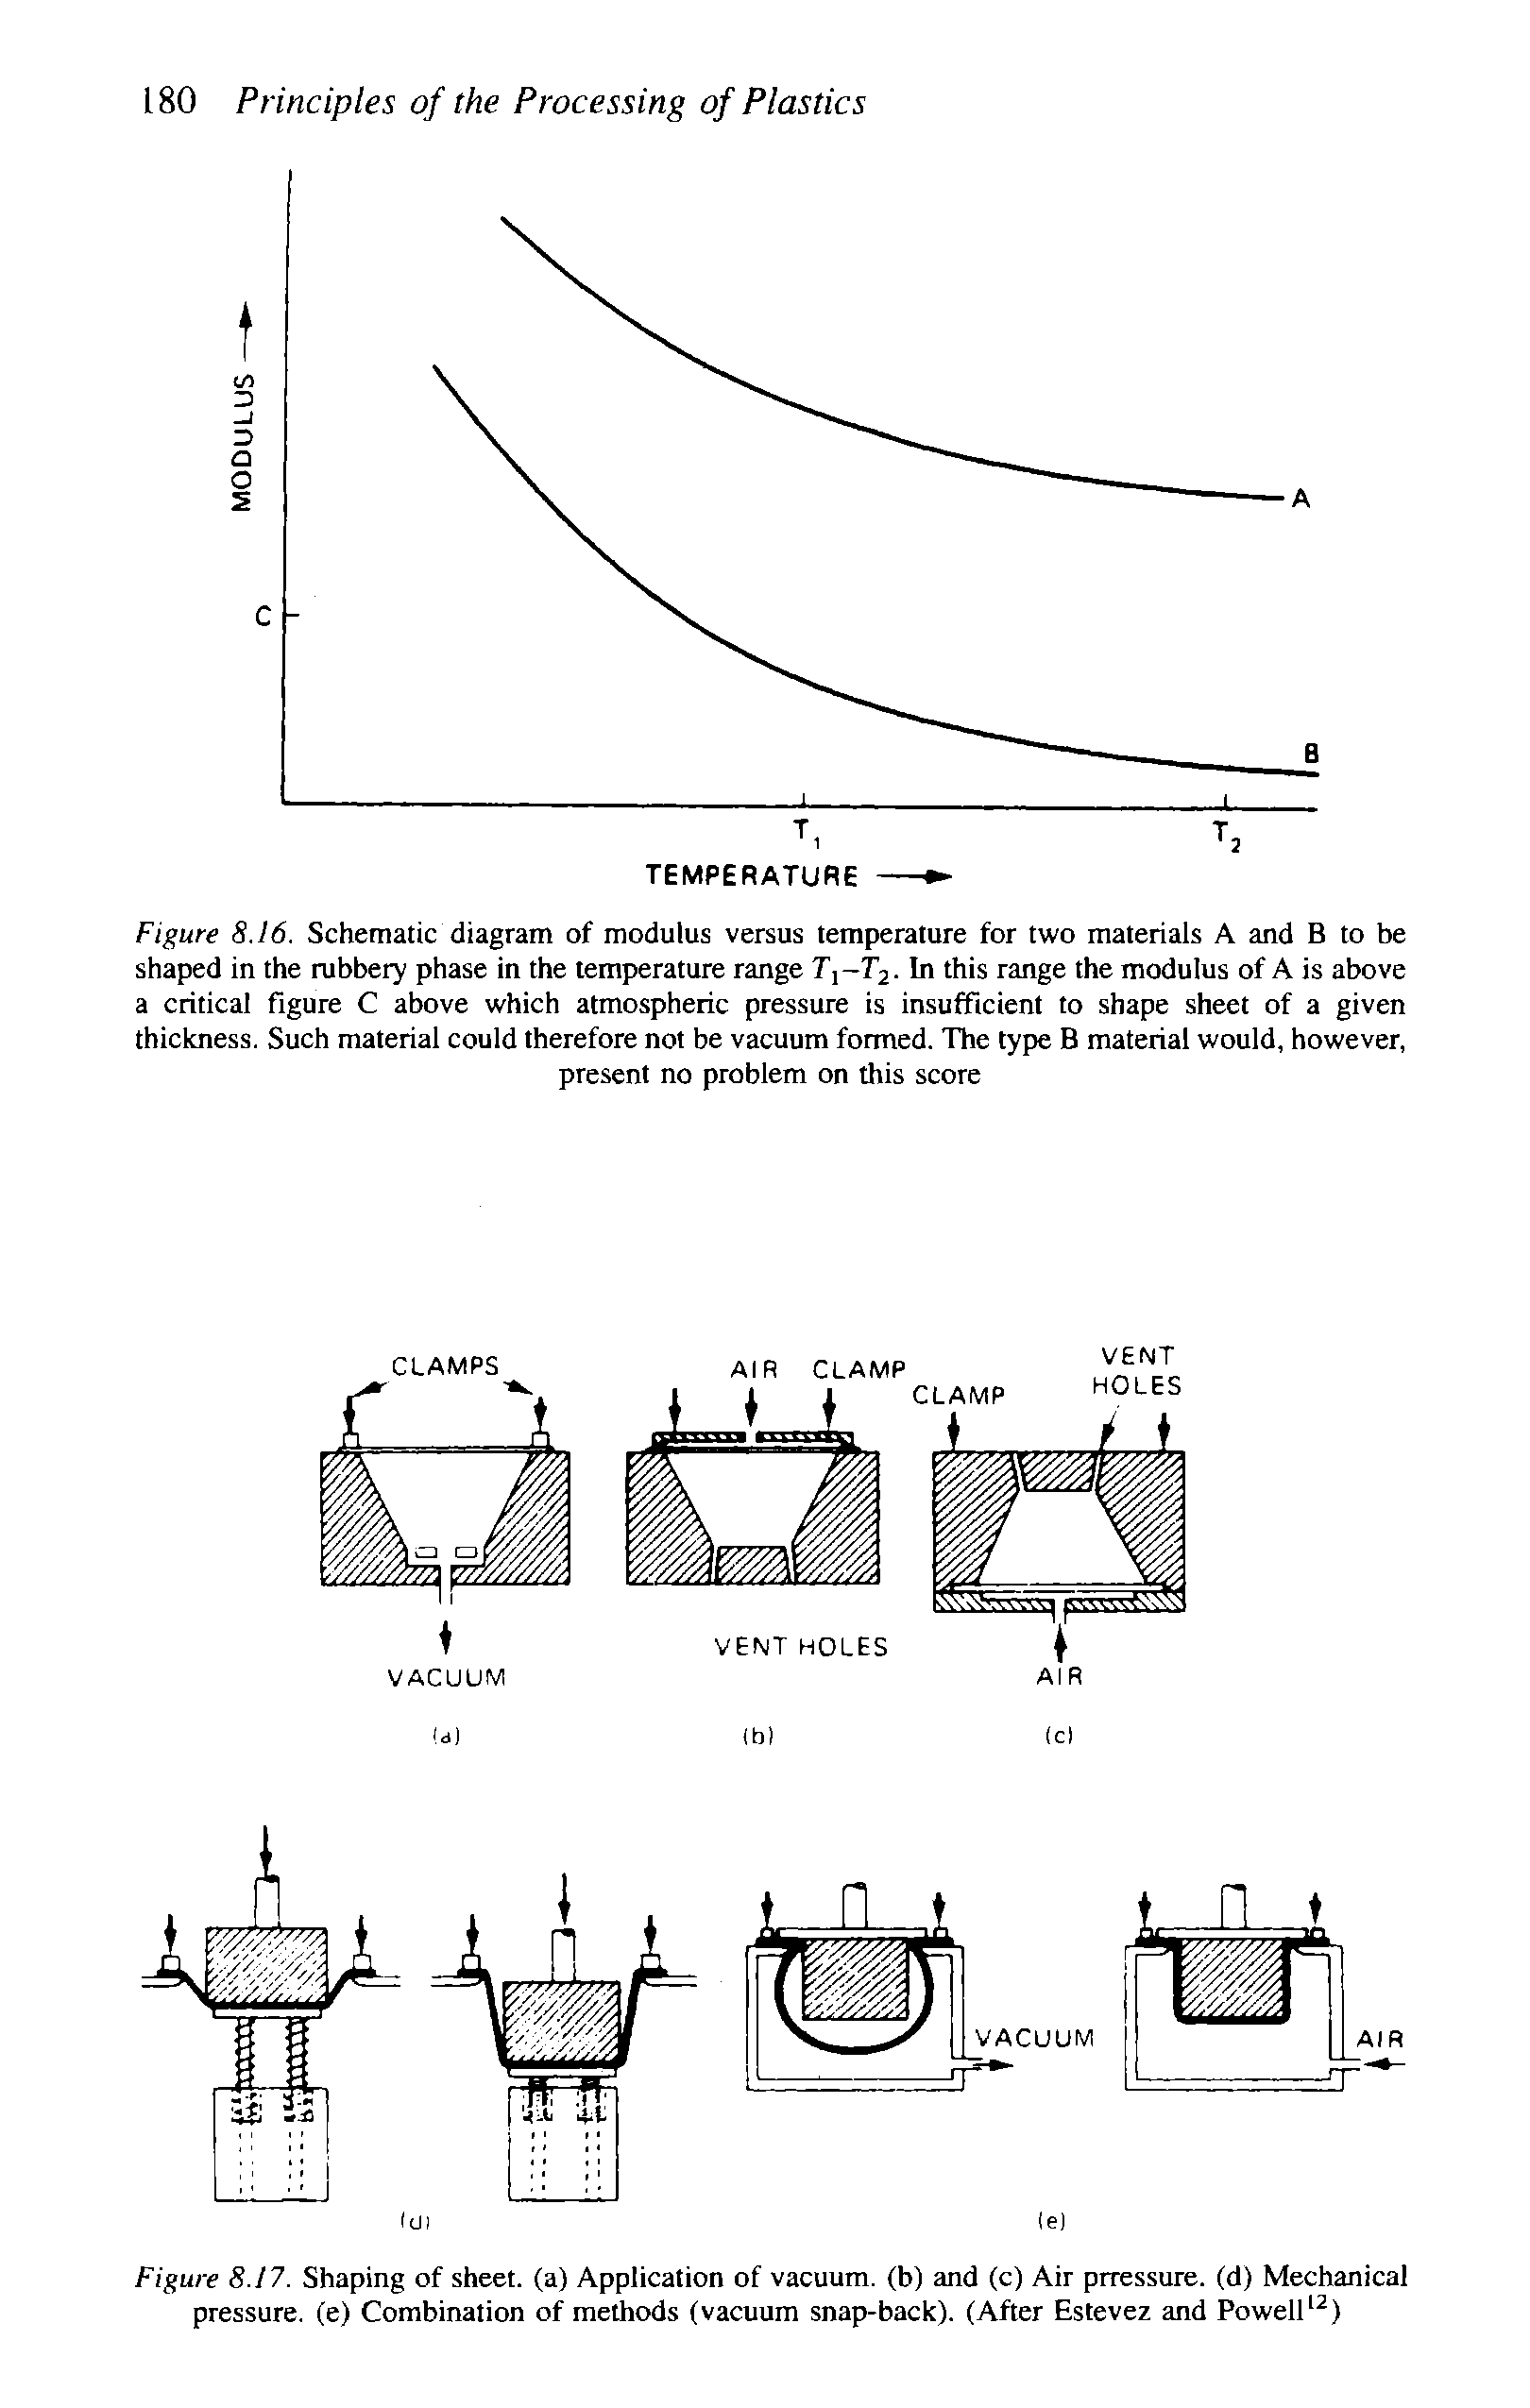 Figure 8.16. Schematic diagram of modulus versus temperature for two materials A and B to be shaped in the rubbery phase in the temperature range T]-T2. In this range the modulus of A is above a critical figure C above which atmospheric pressure is insufficient to shape sheet of a given thickness. Such material could therefore not be vacuum formed. The type B material would, however, present no problem on this score...